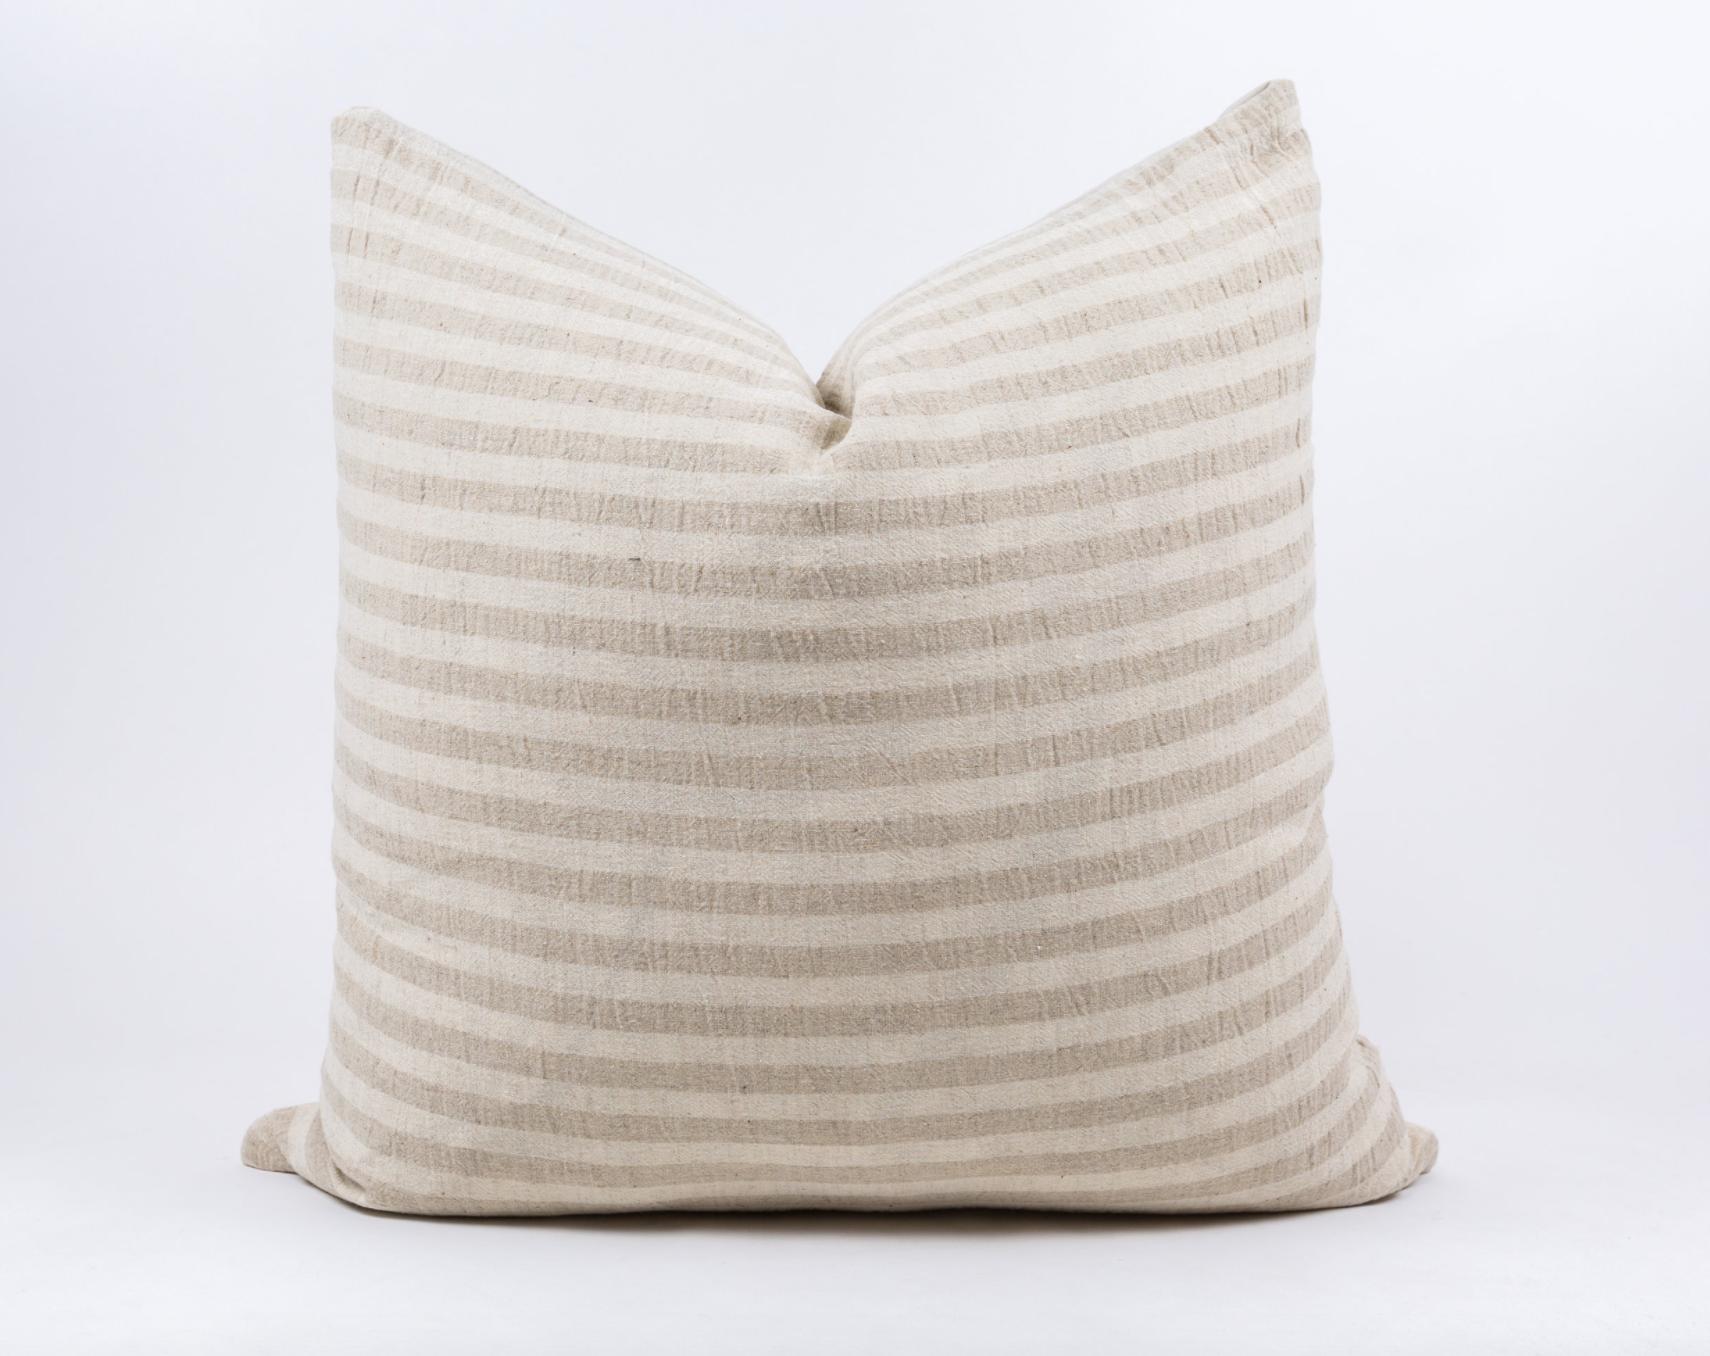 Ang Pillow design by Bryar Wolf